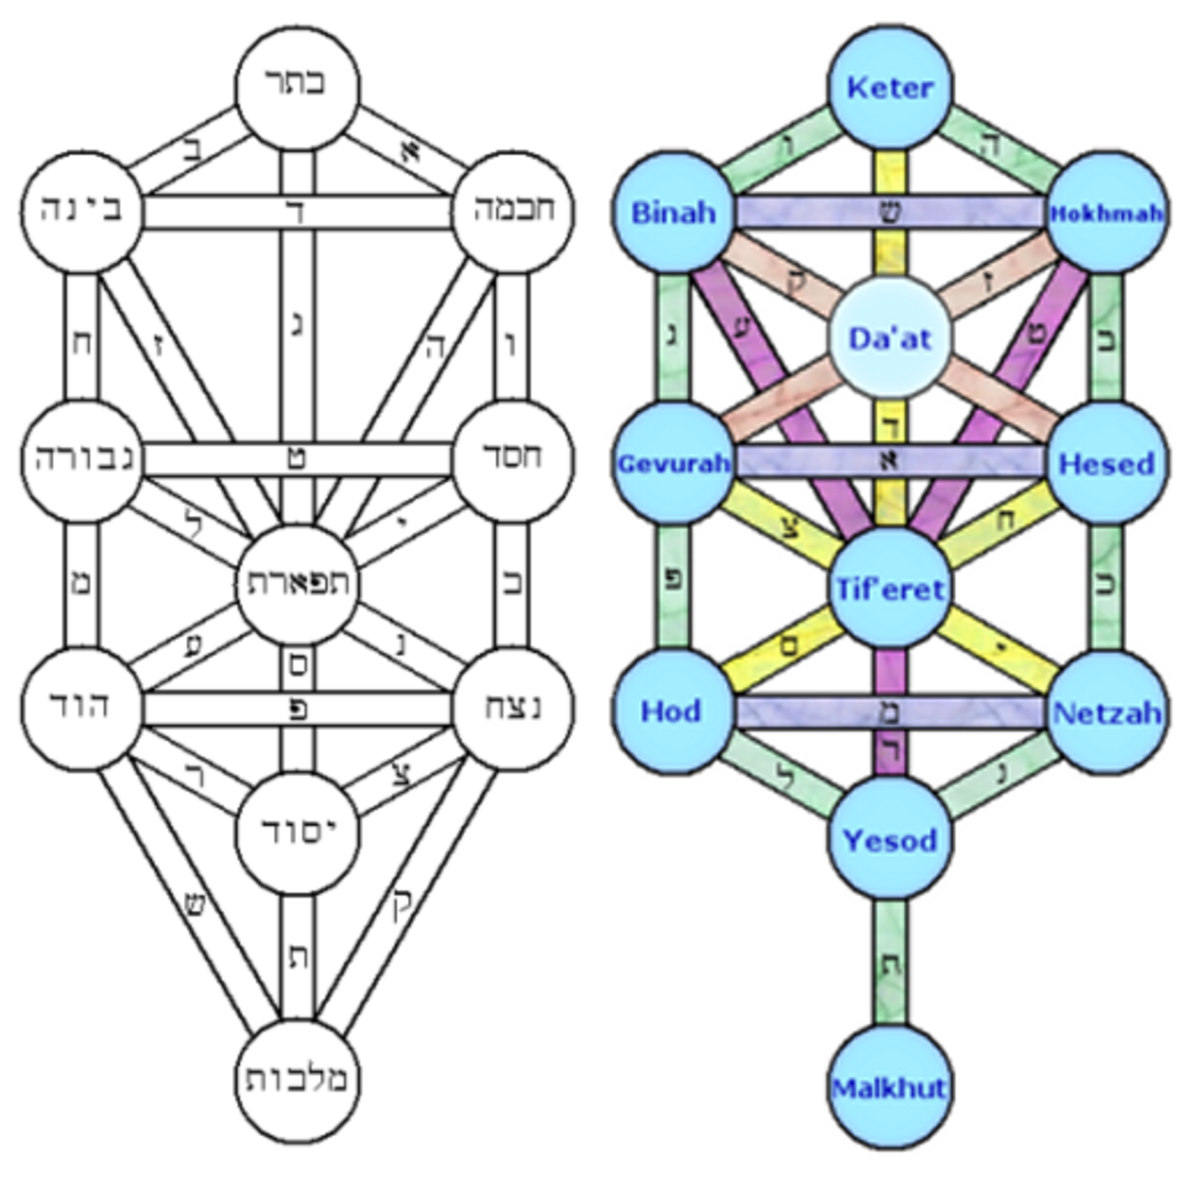 Kabbalistic "Tree of Life" -- Hebrew & transliterated. Both are public domain. http://commons.wikimedia.org/wiki/File:Tree_of_life_kircher_hebrew.png /// http://en.wikipedia.org/wiki/File:Ktreewnames.png